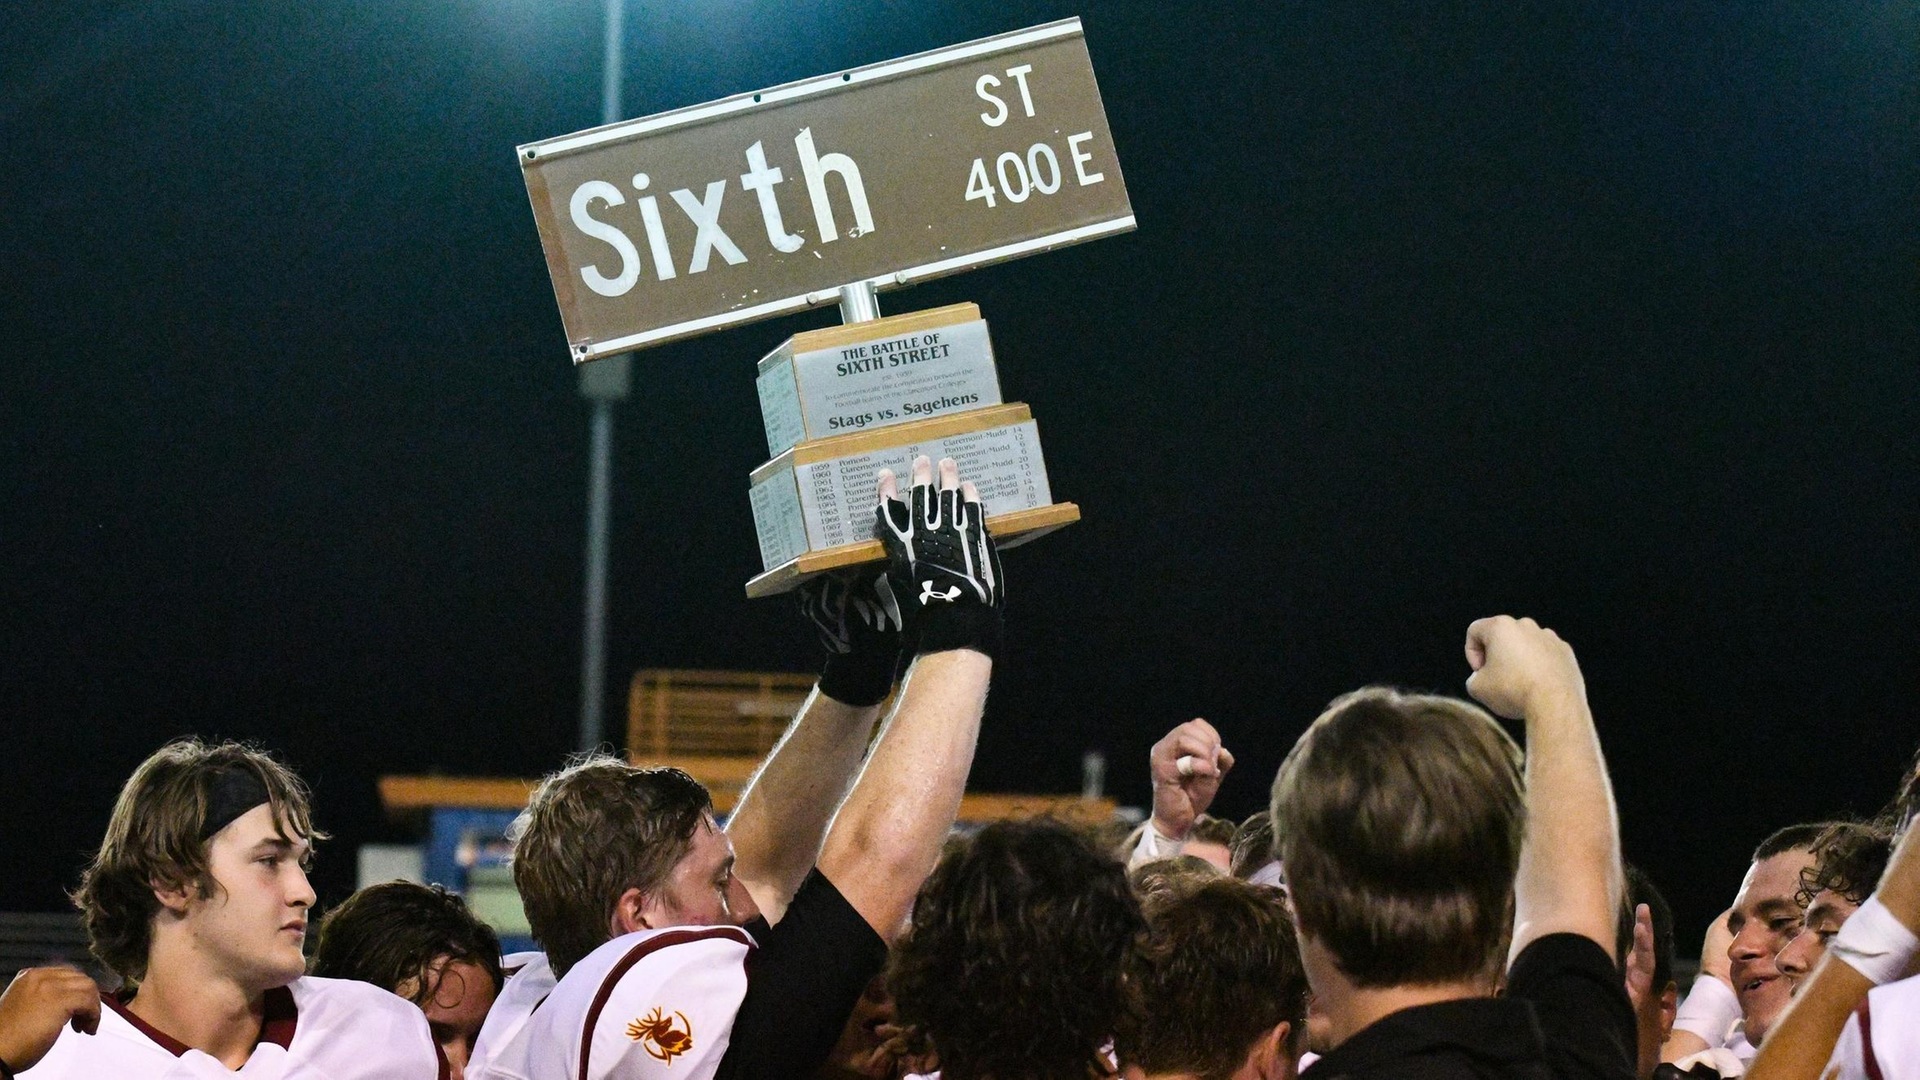 CMS will try to hoist the Sixth Street Trophy at Pomona-Pitzer again this year